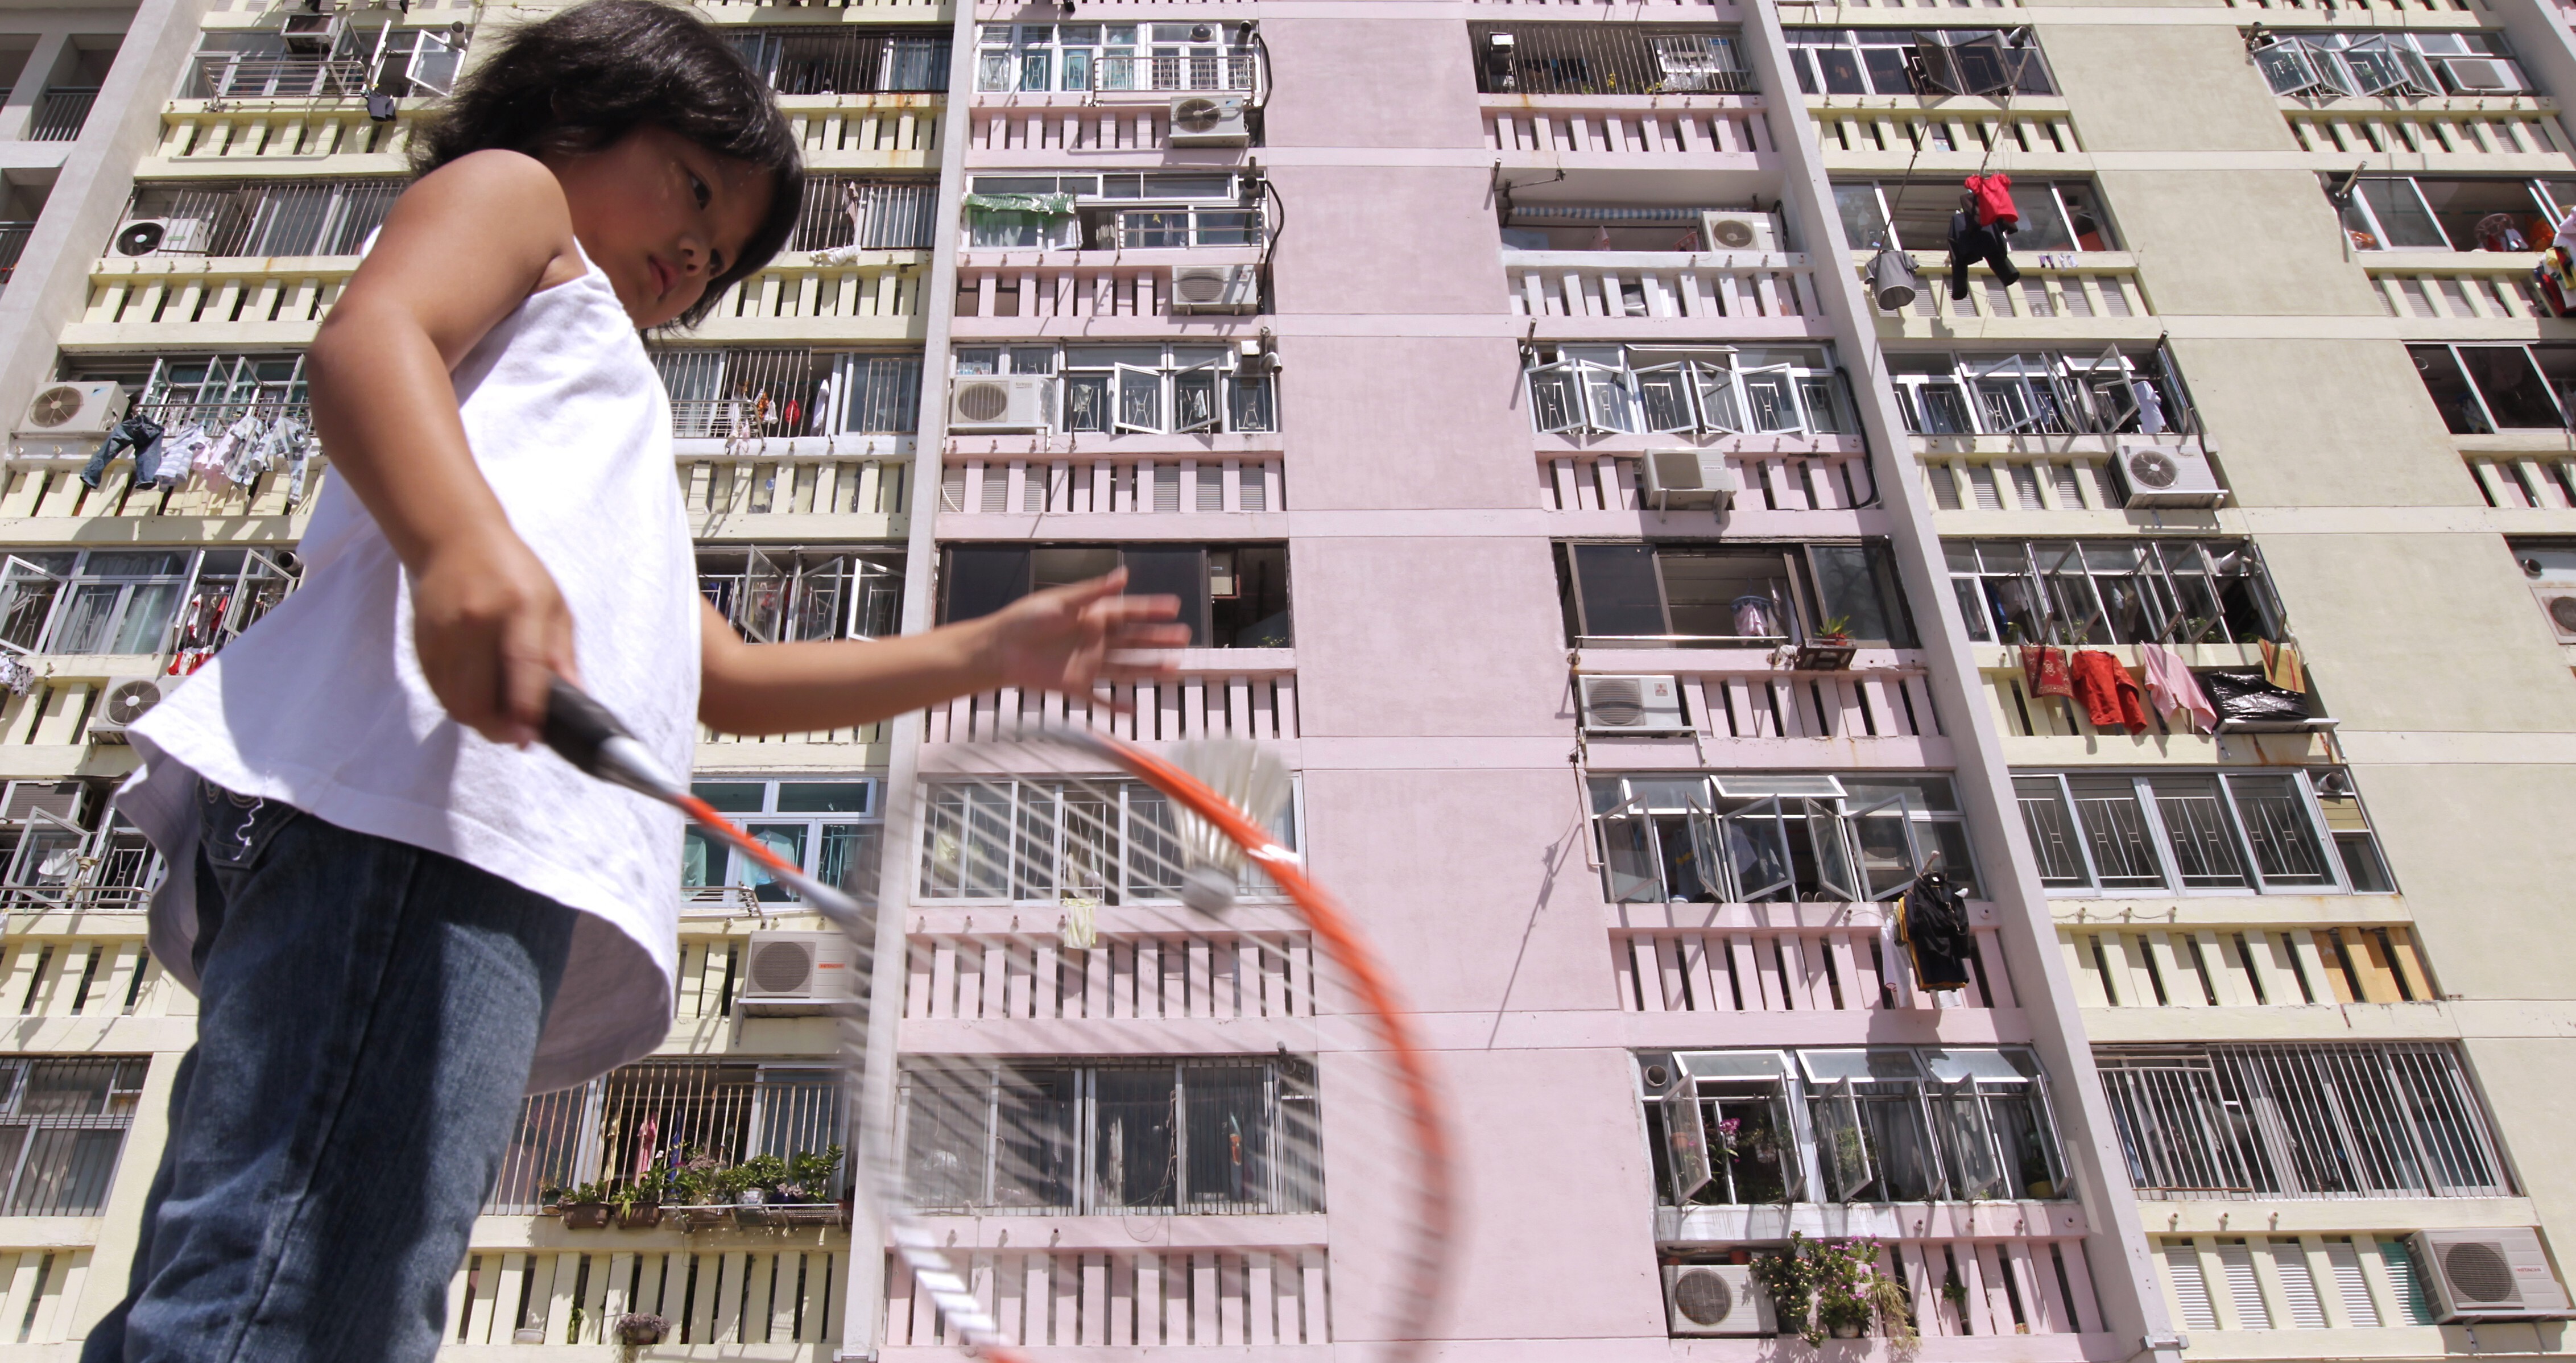 Hong Kong is dependent on air cons during its hot and humid months, but ecologists say we need to reduce our use of them. Photo: SCMP